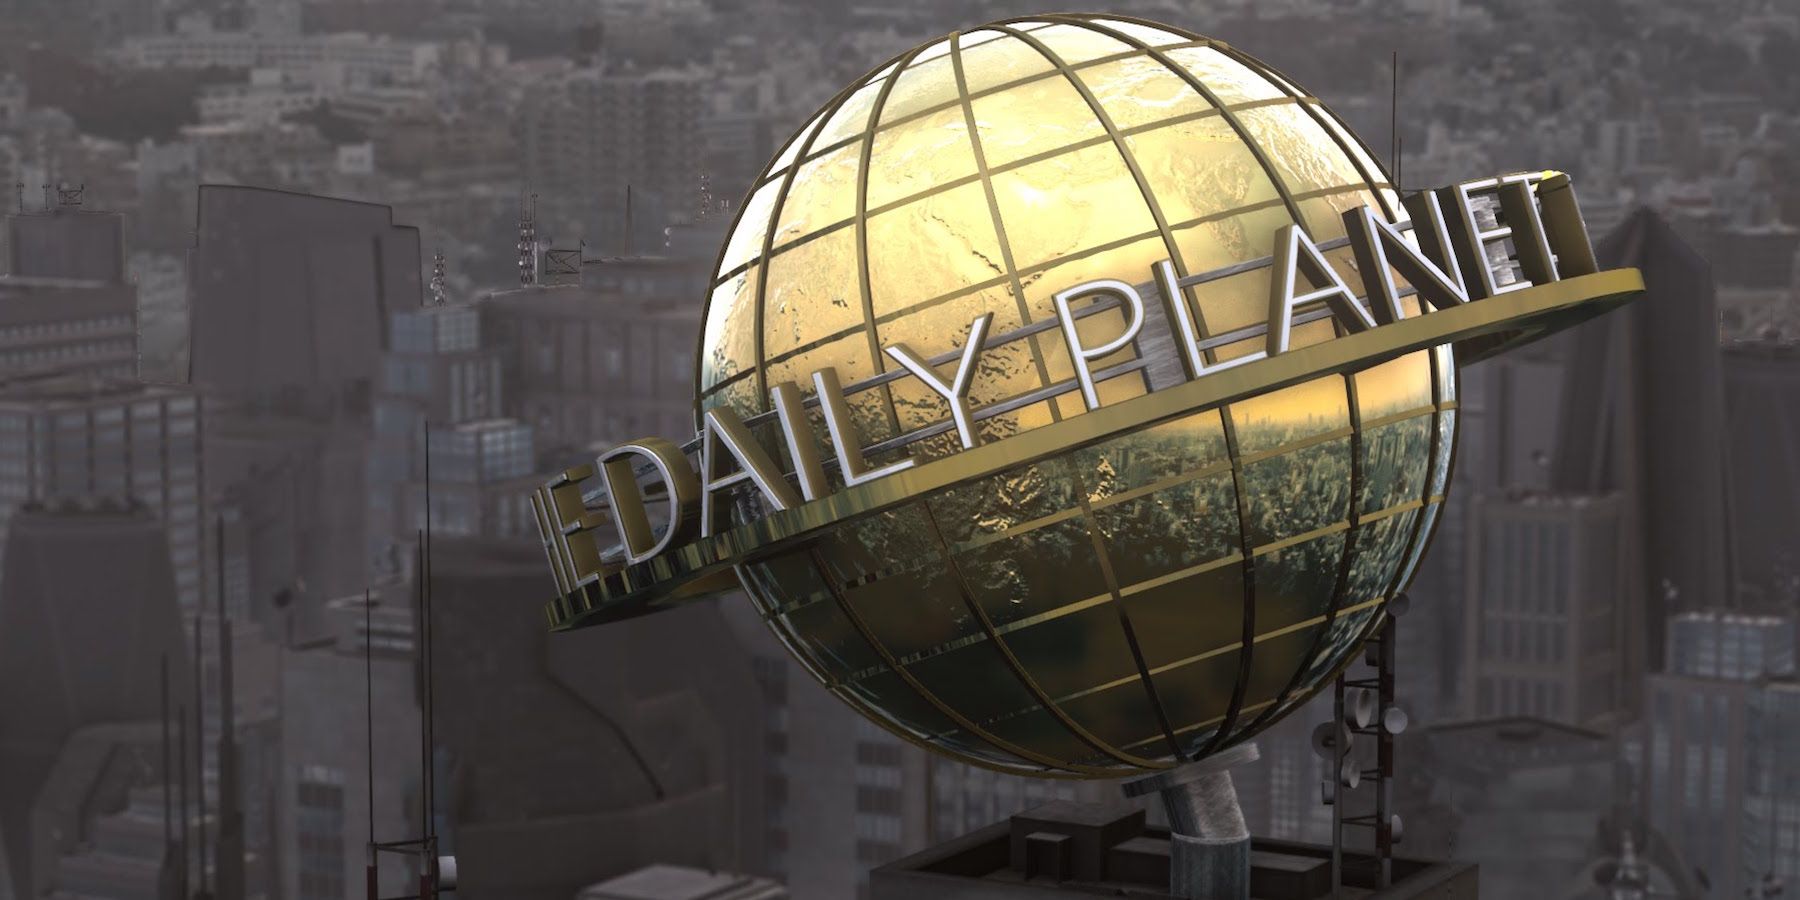 The Daily Planet sign in Metropolis